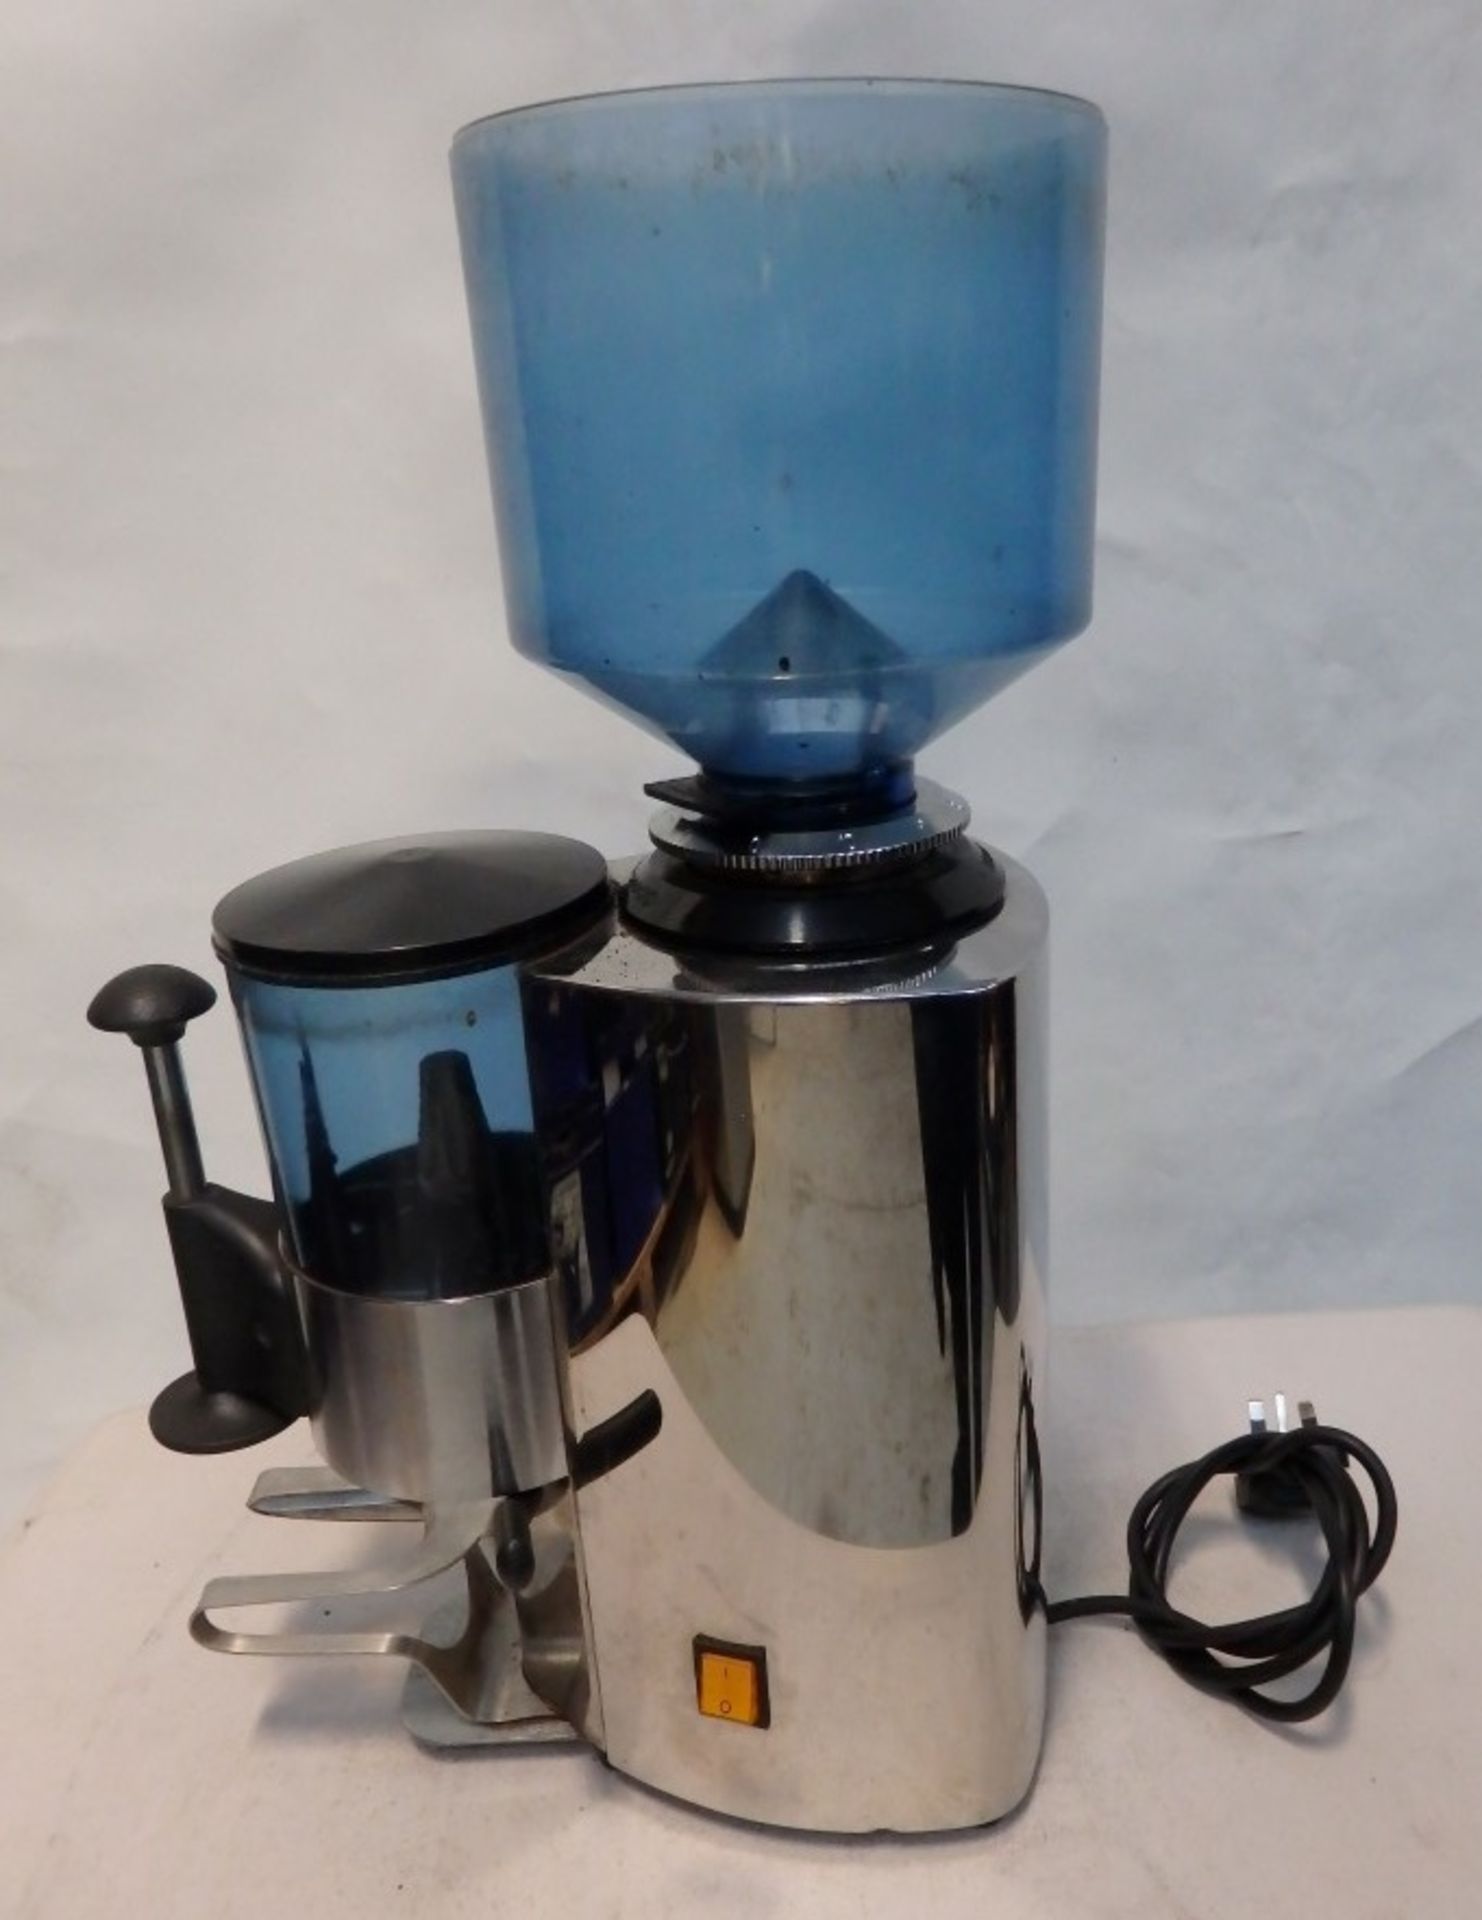 1 x Bezzera Commercial Coffee Grinder (Model BB003) - Stainless Steel AISI 304 Body - Capacity: - Image 2 of 8